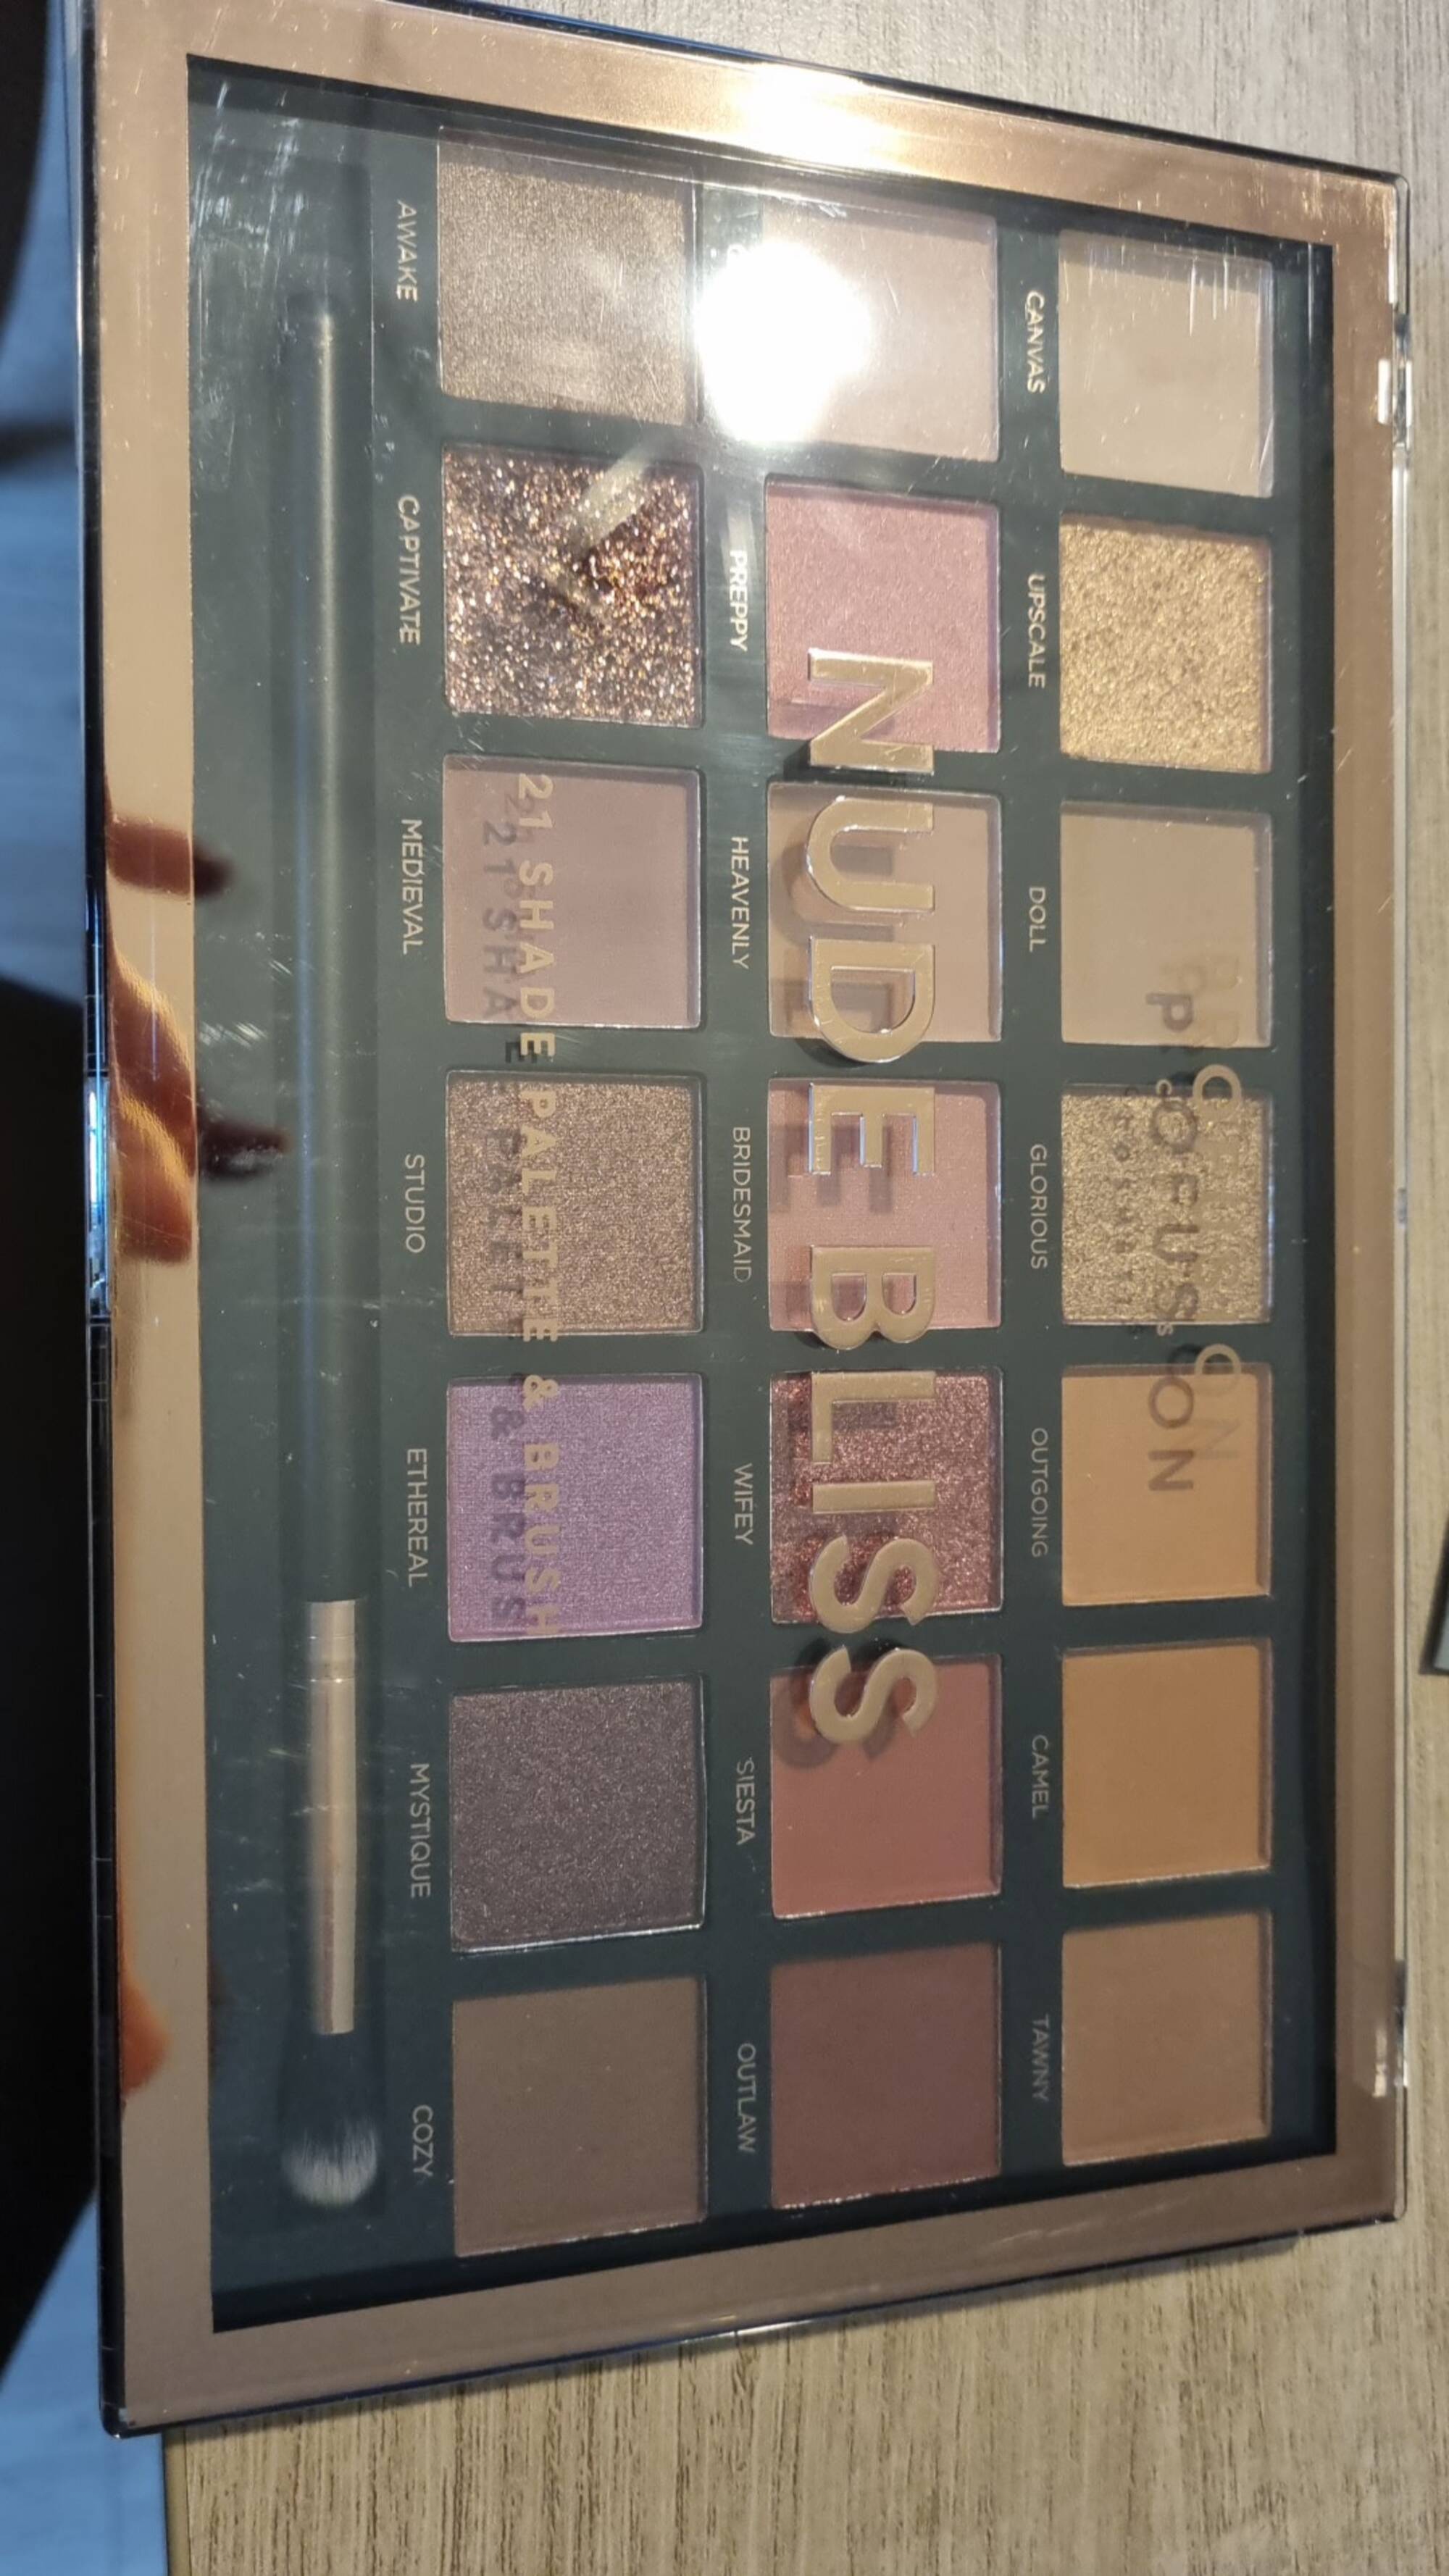 PROFUSION COSMETICS - Nude bliss - 21 shade palette & brush